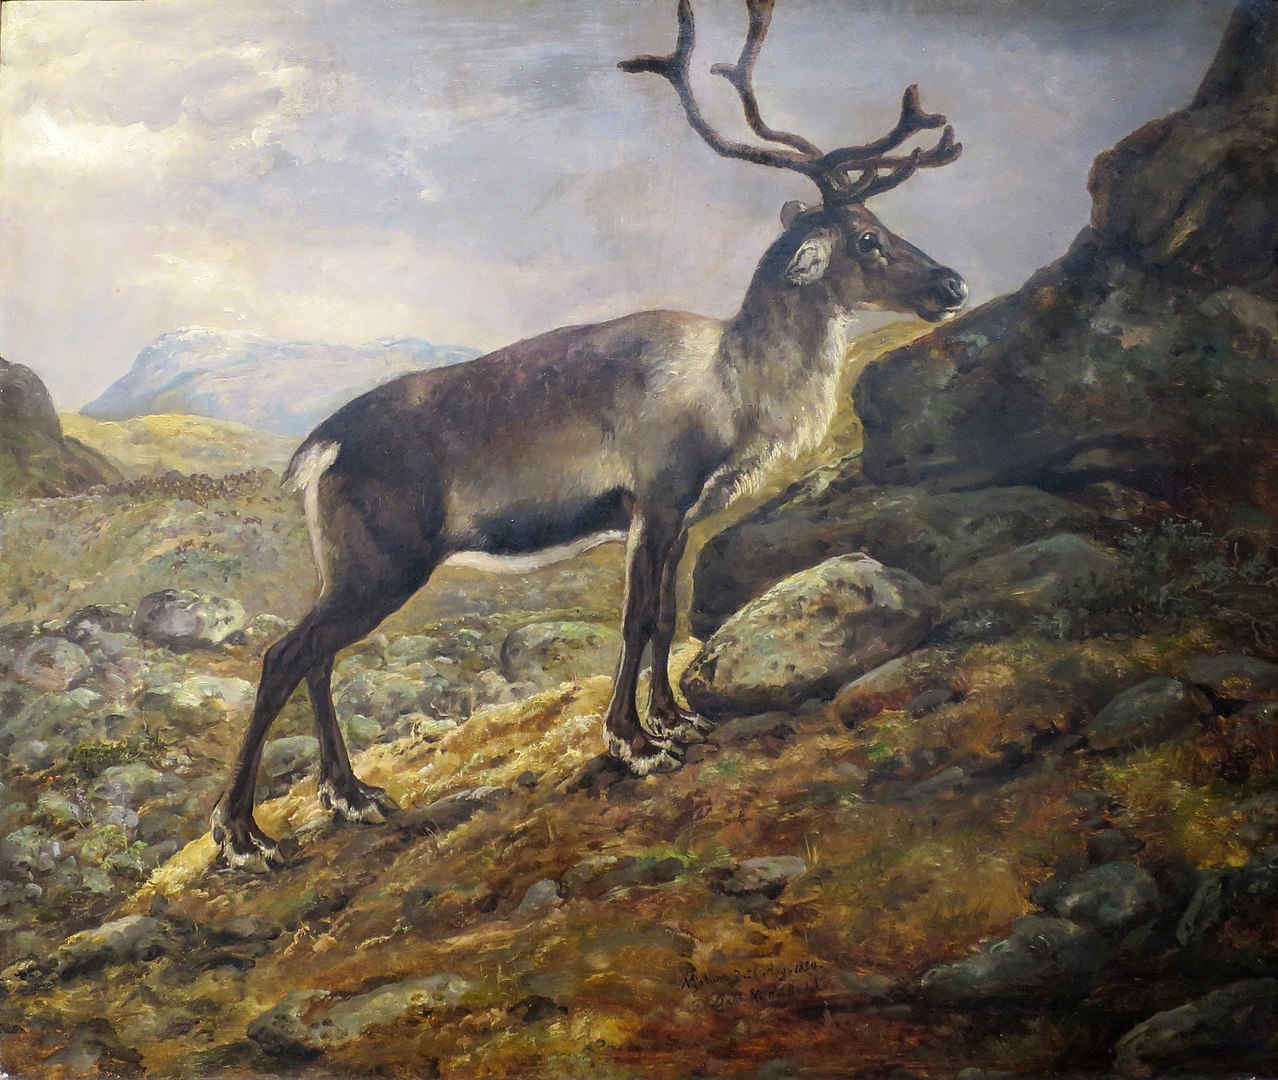 An image of a reindeer standing on a cliffside of a hill.